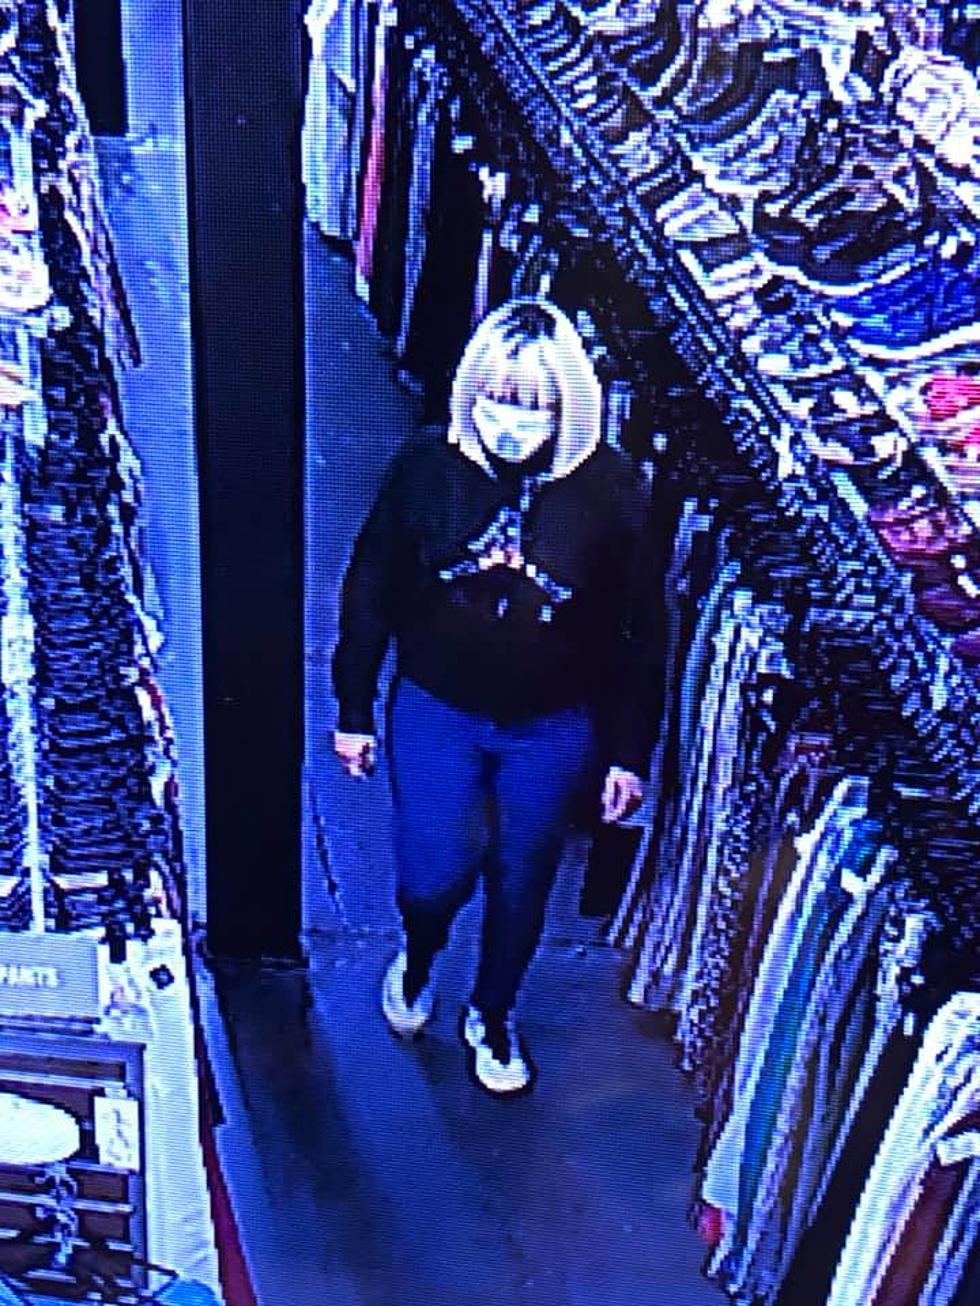 Woman Caught on Camera Stealing from Grandville Store [Video]